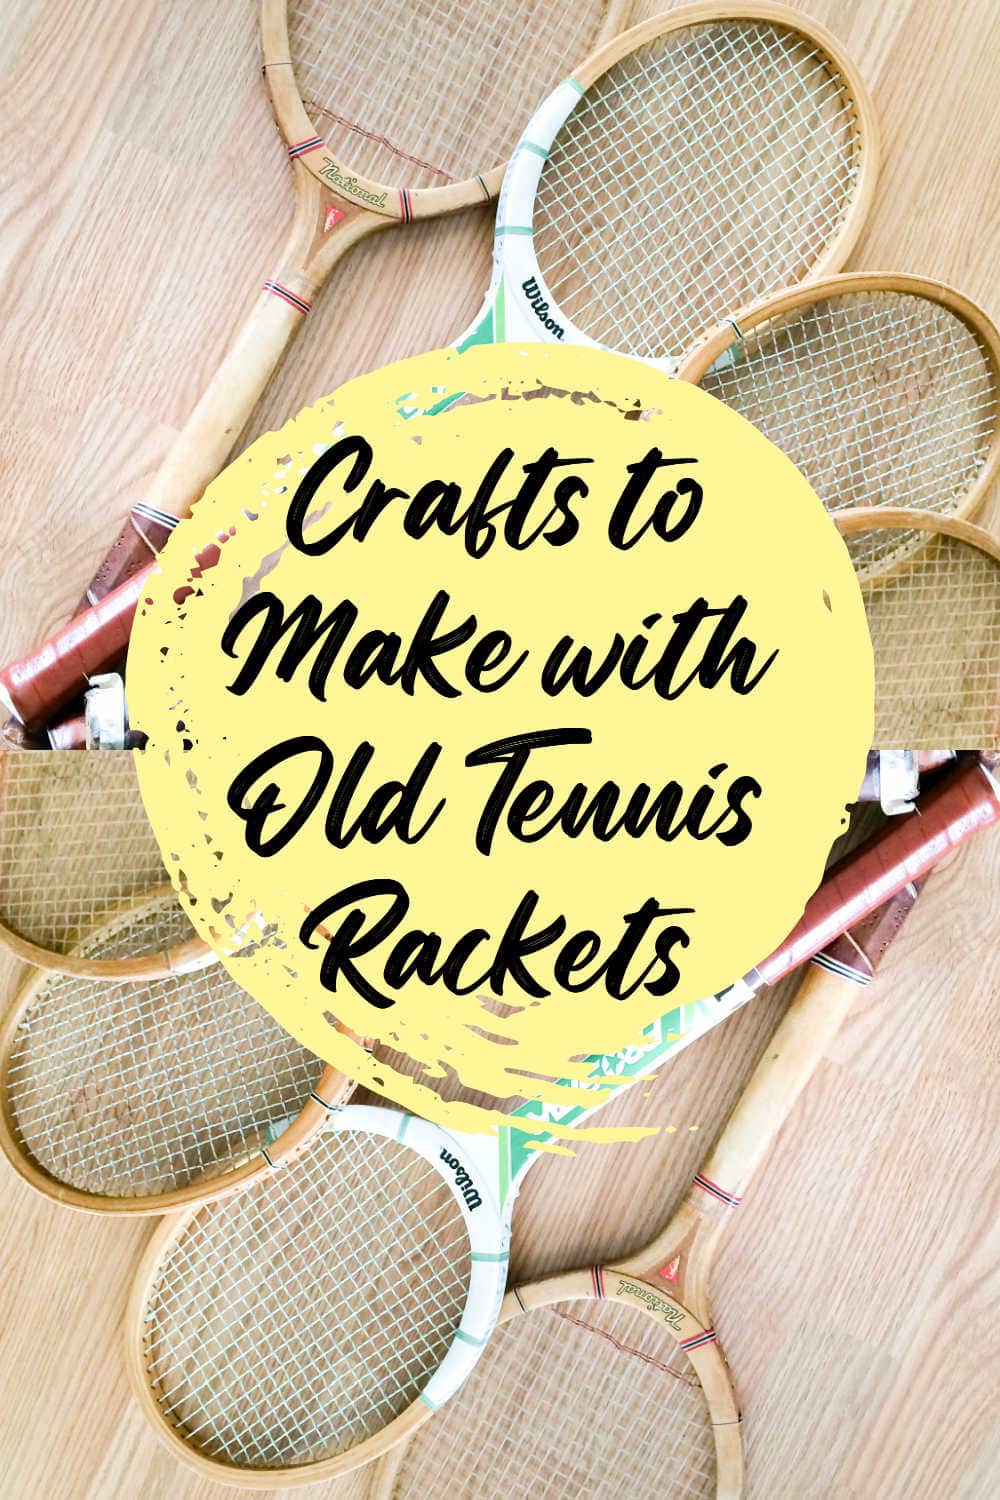 upcycle ideas for wooden tennis rackets